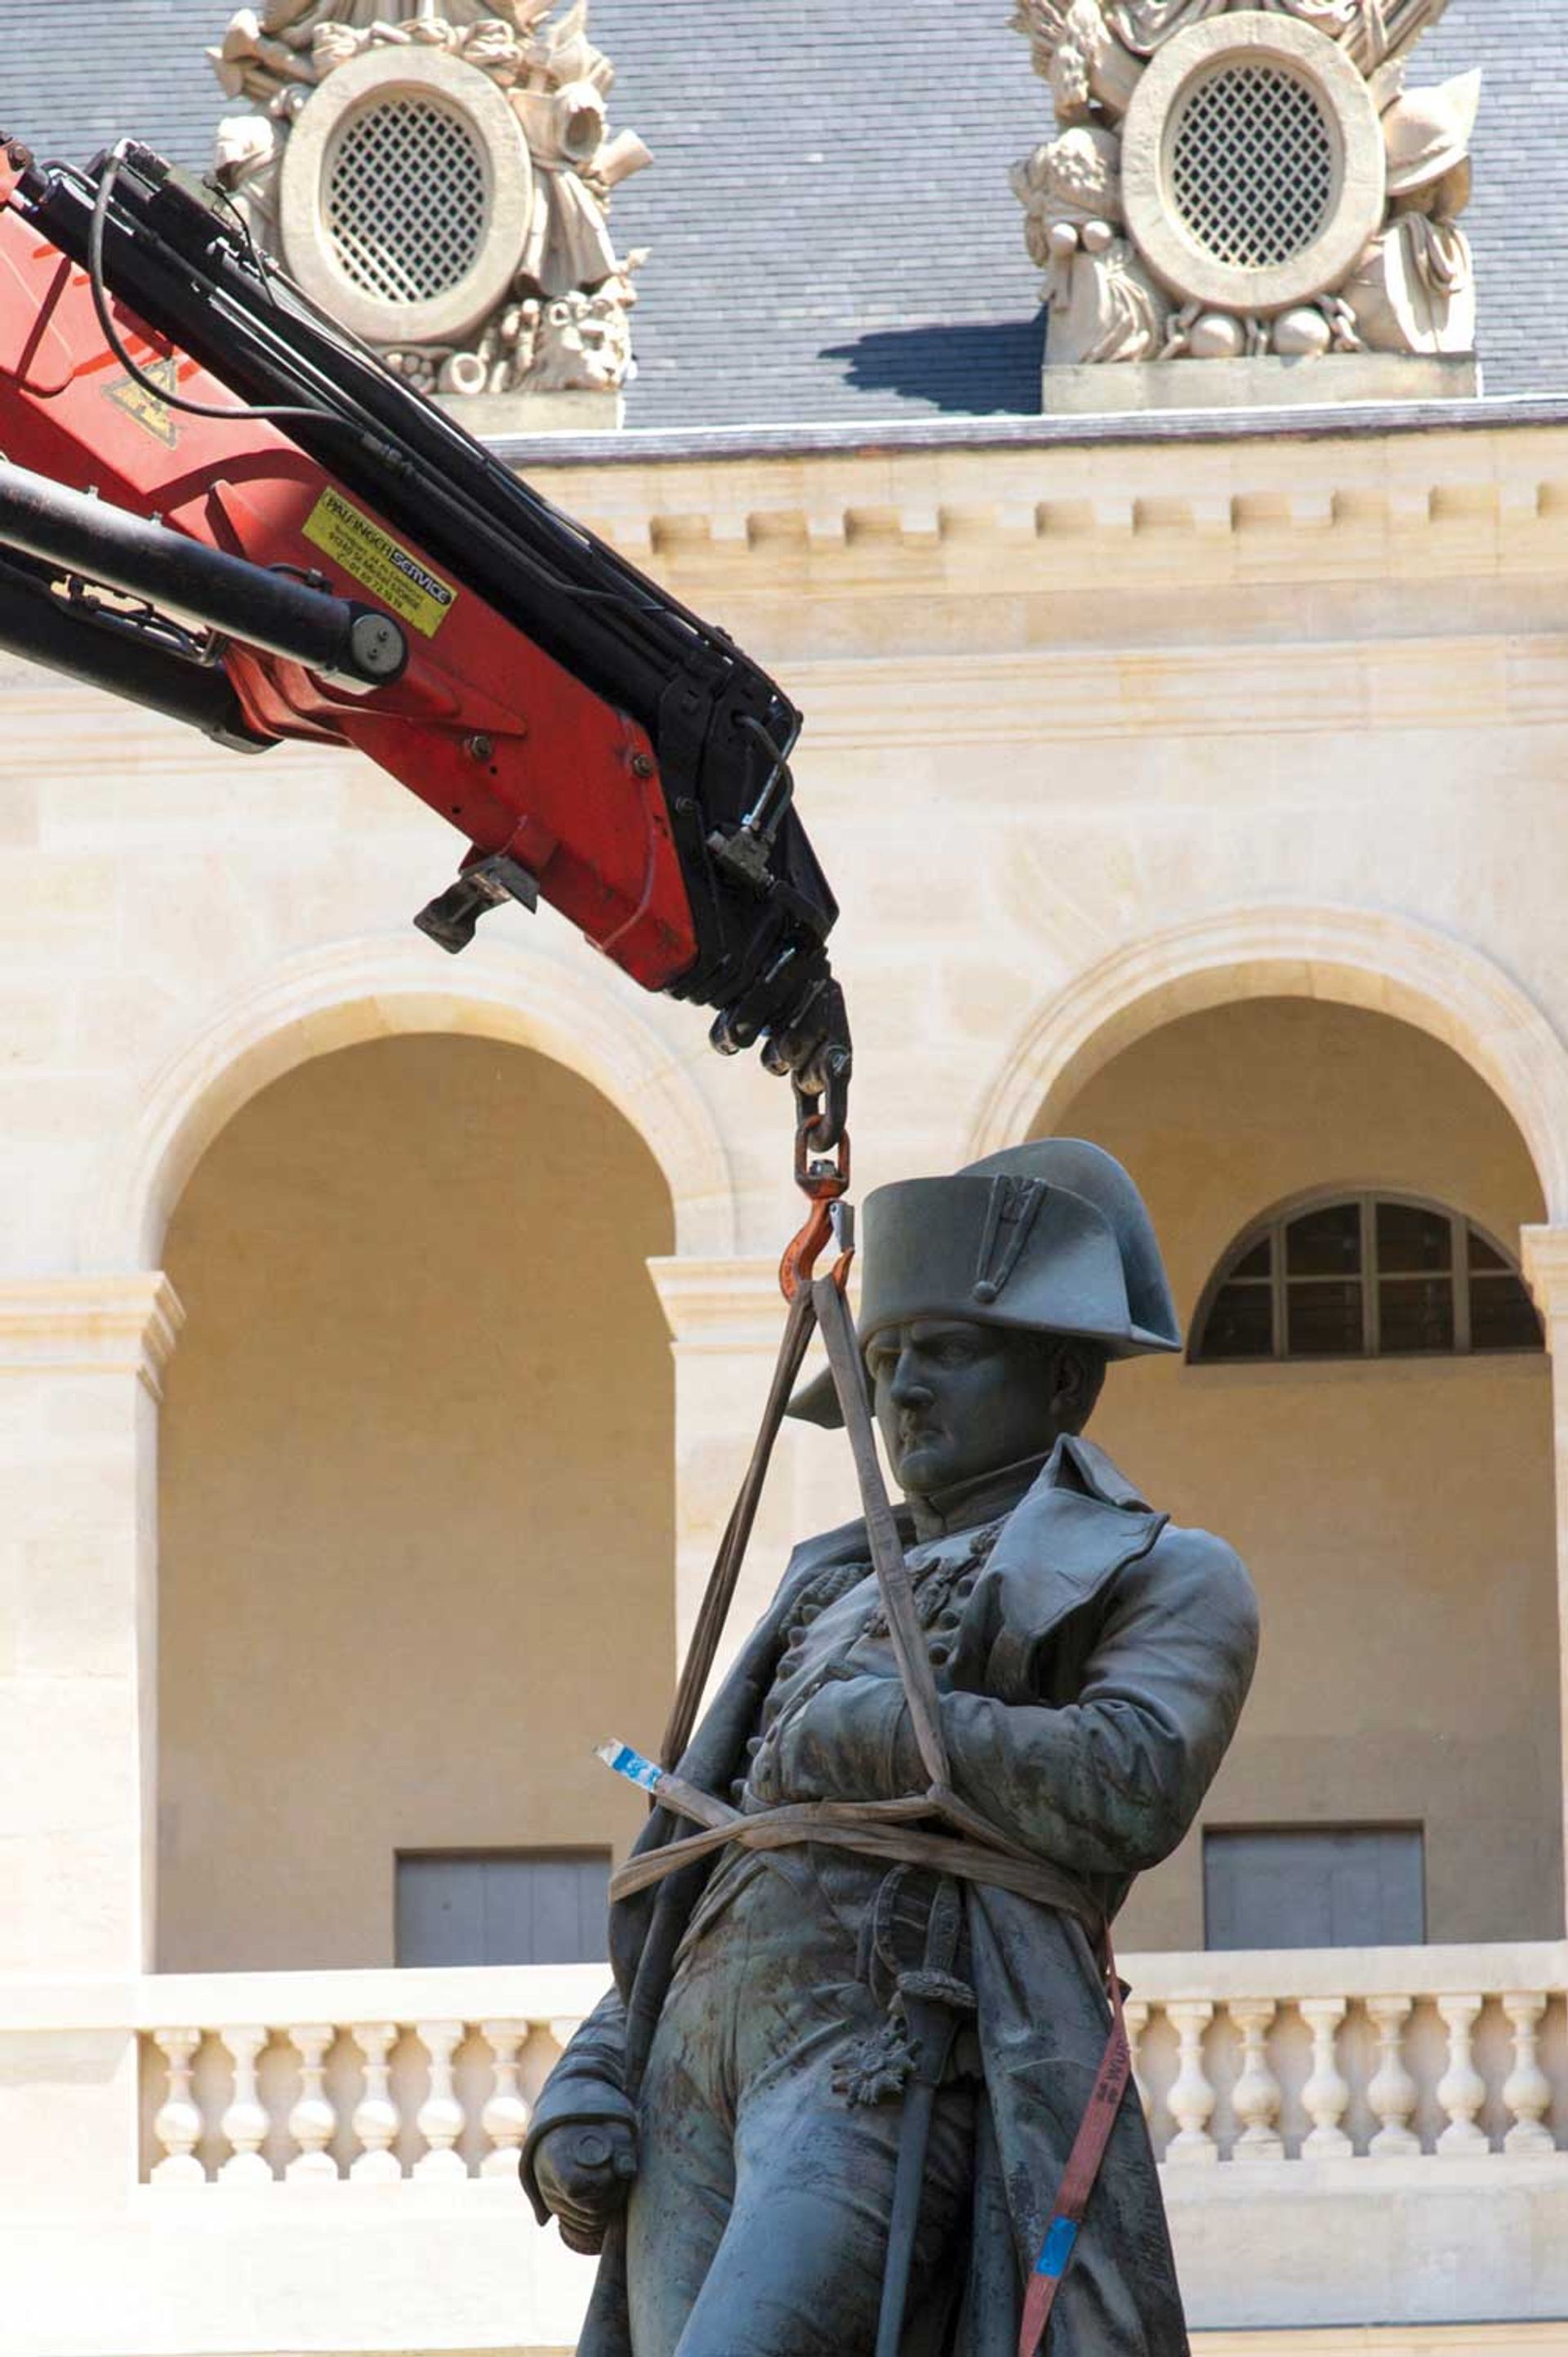 Return from exile: the statue (1833) by Charles Émile Seurre is back at Les Invalides Photo: © RMN-GP/Anne-Sylvaine Marre-Noël